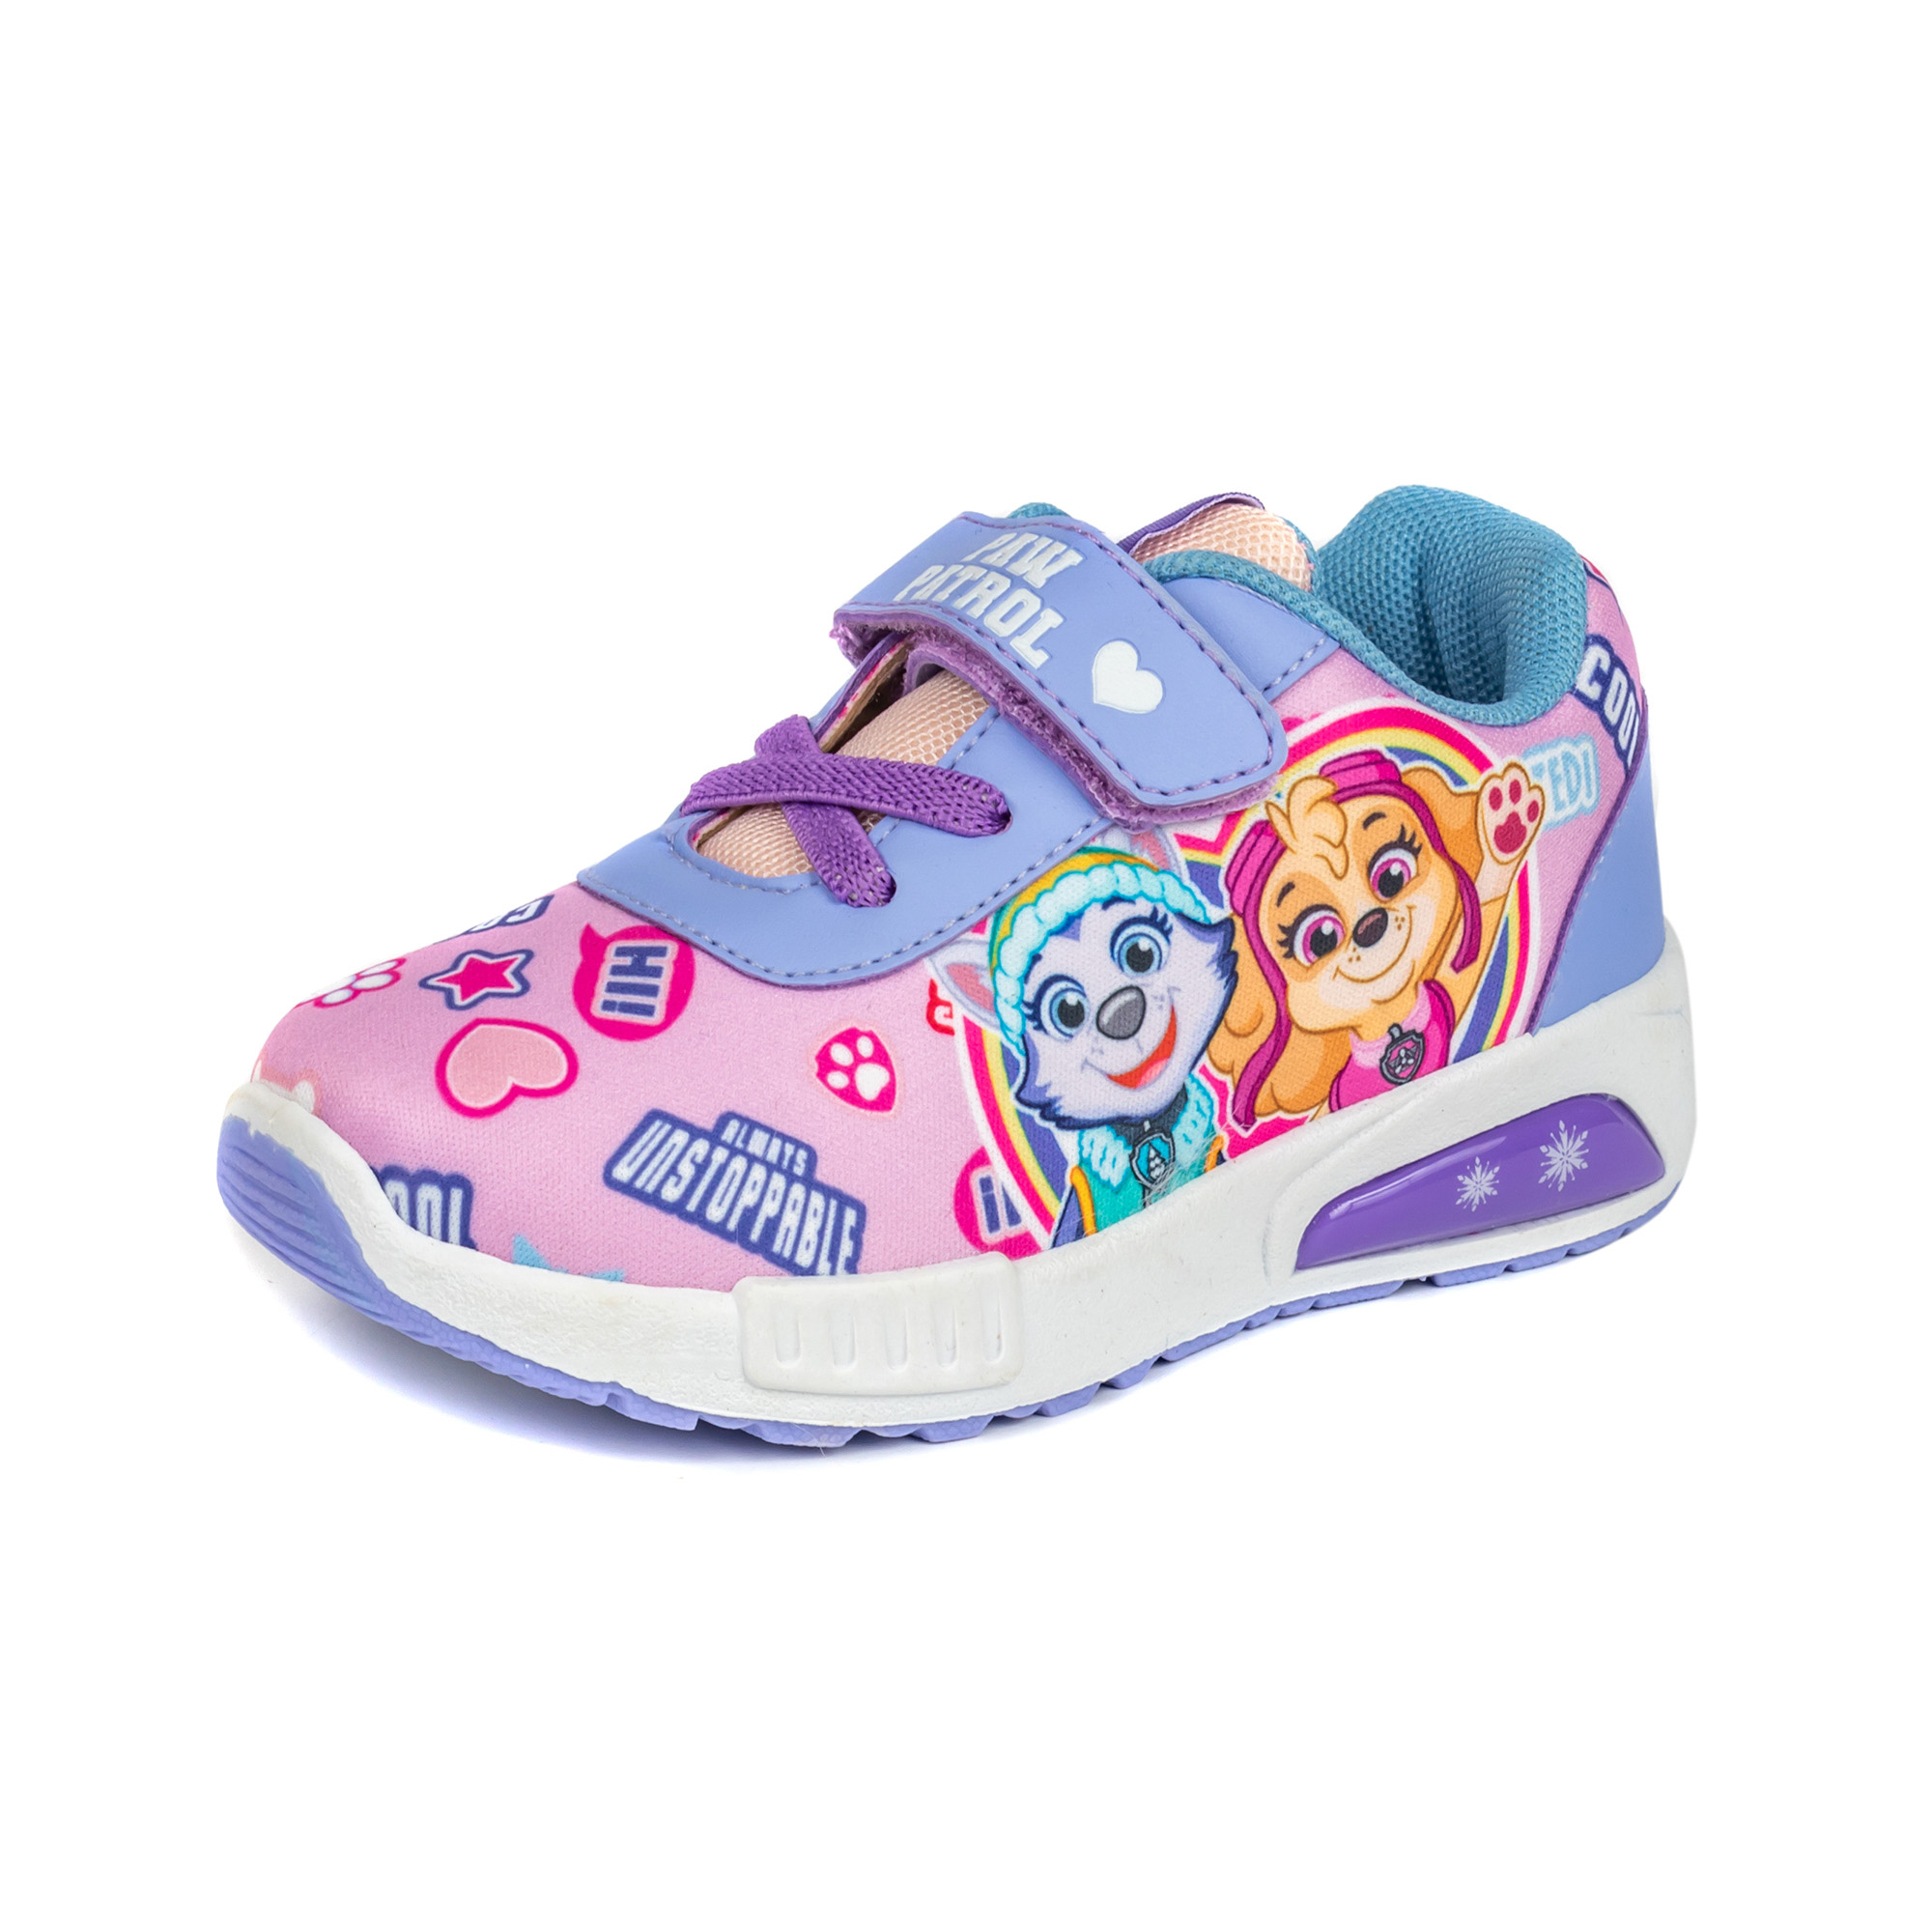 Sneaker Shoes, Children Shoes ,Injection shoes ,Lilac Textile with sublimation printing +Pu Upper, PVC injection Outsole